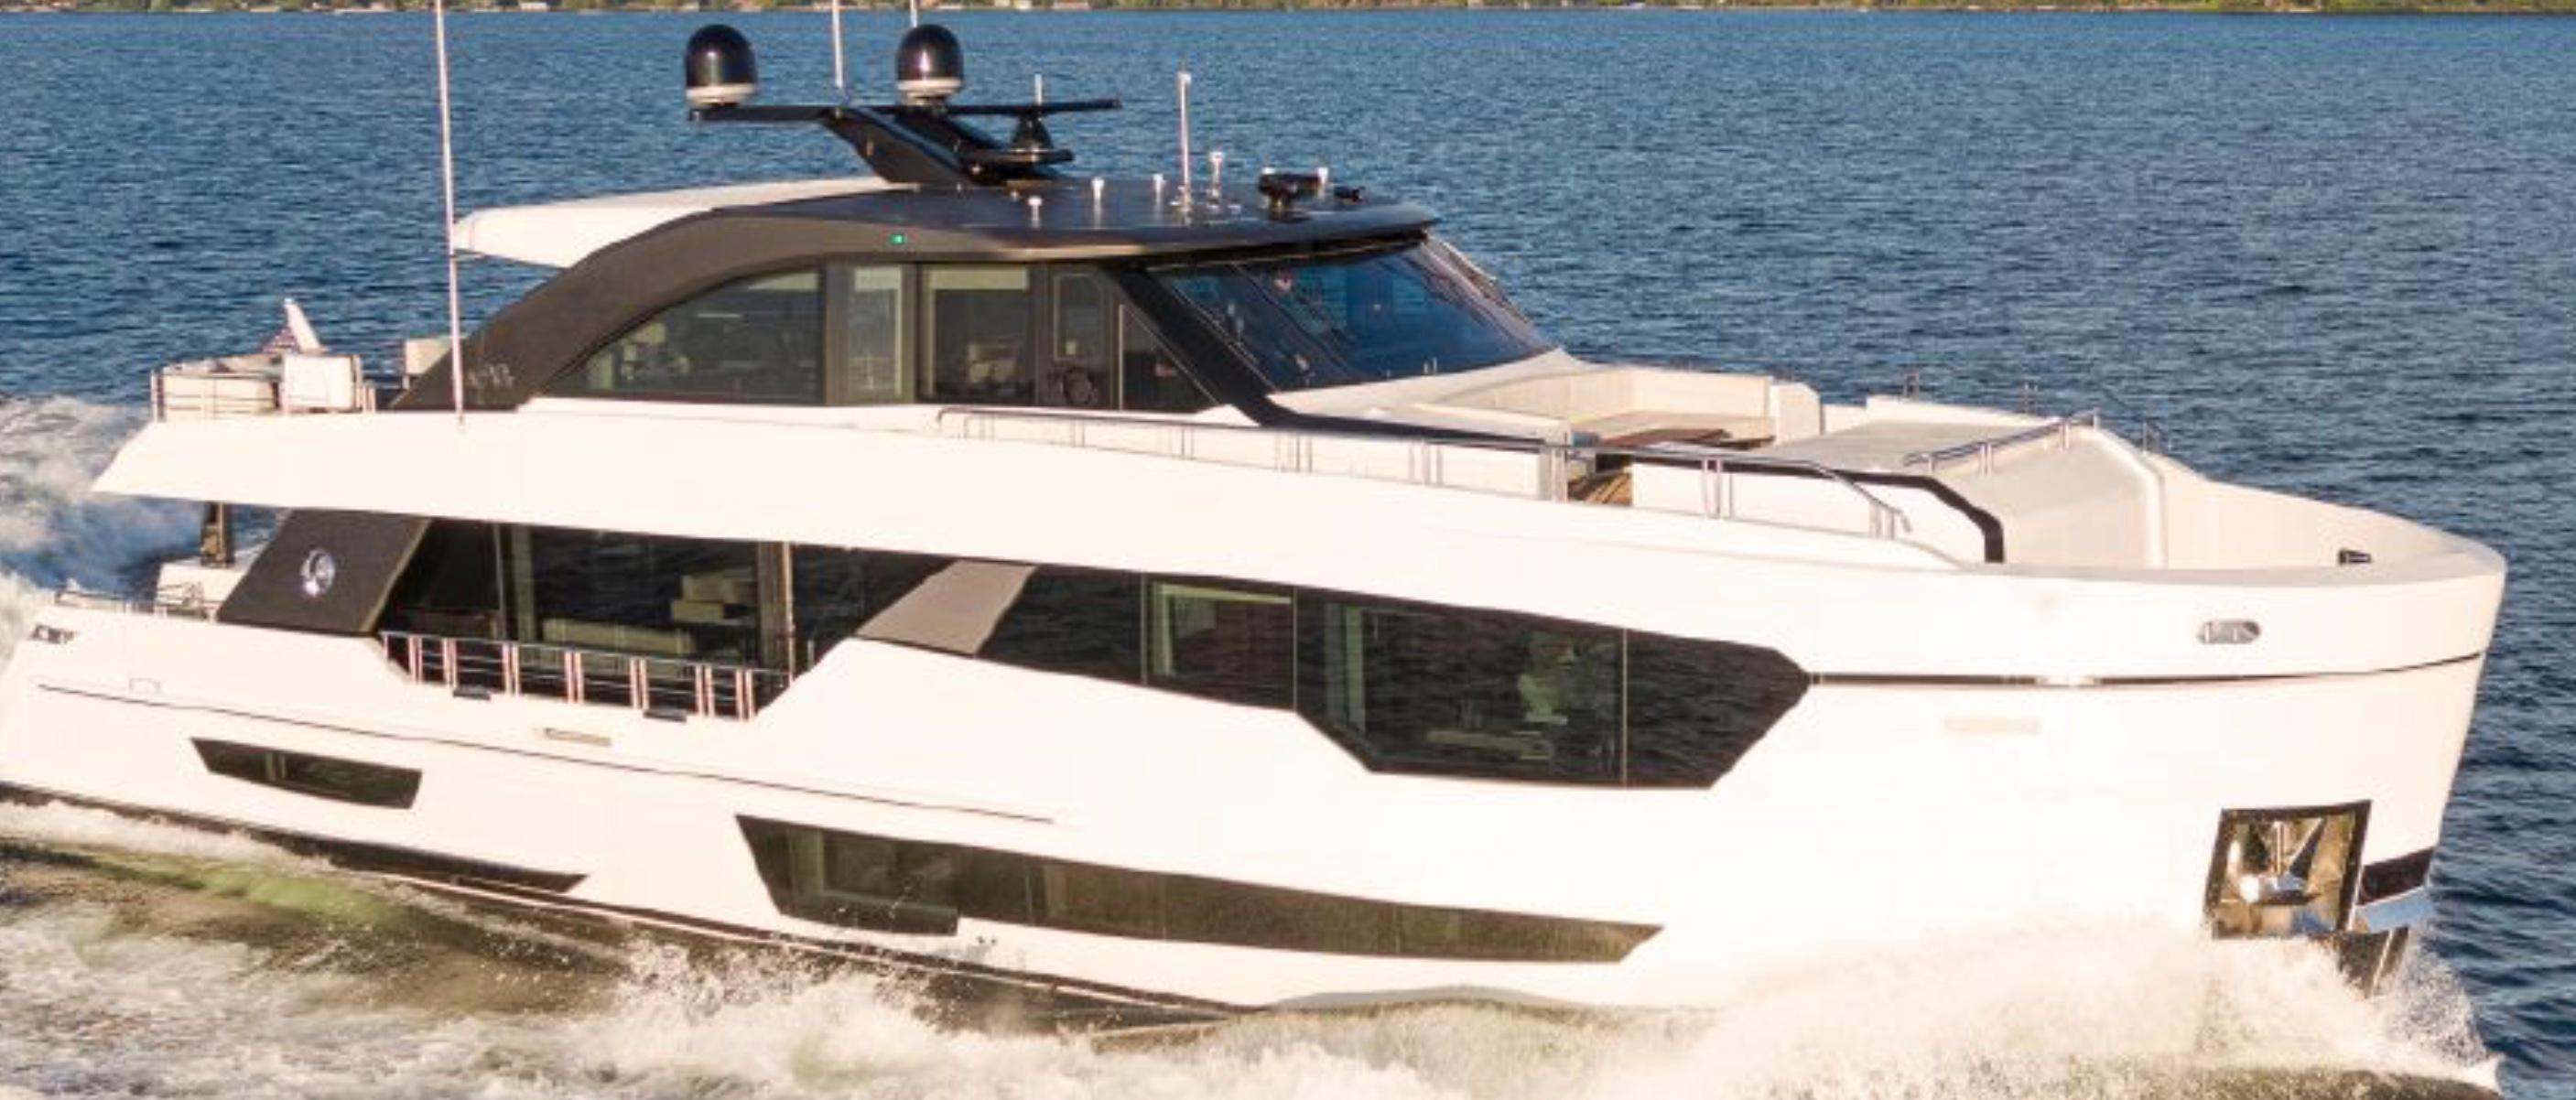 Cablemaster — West Coast Yacht Systems